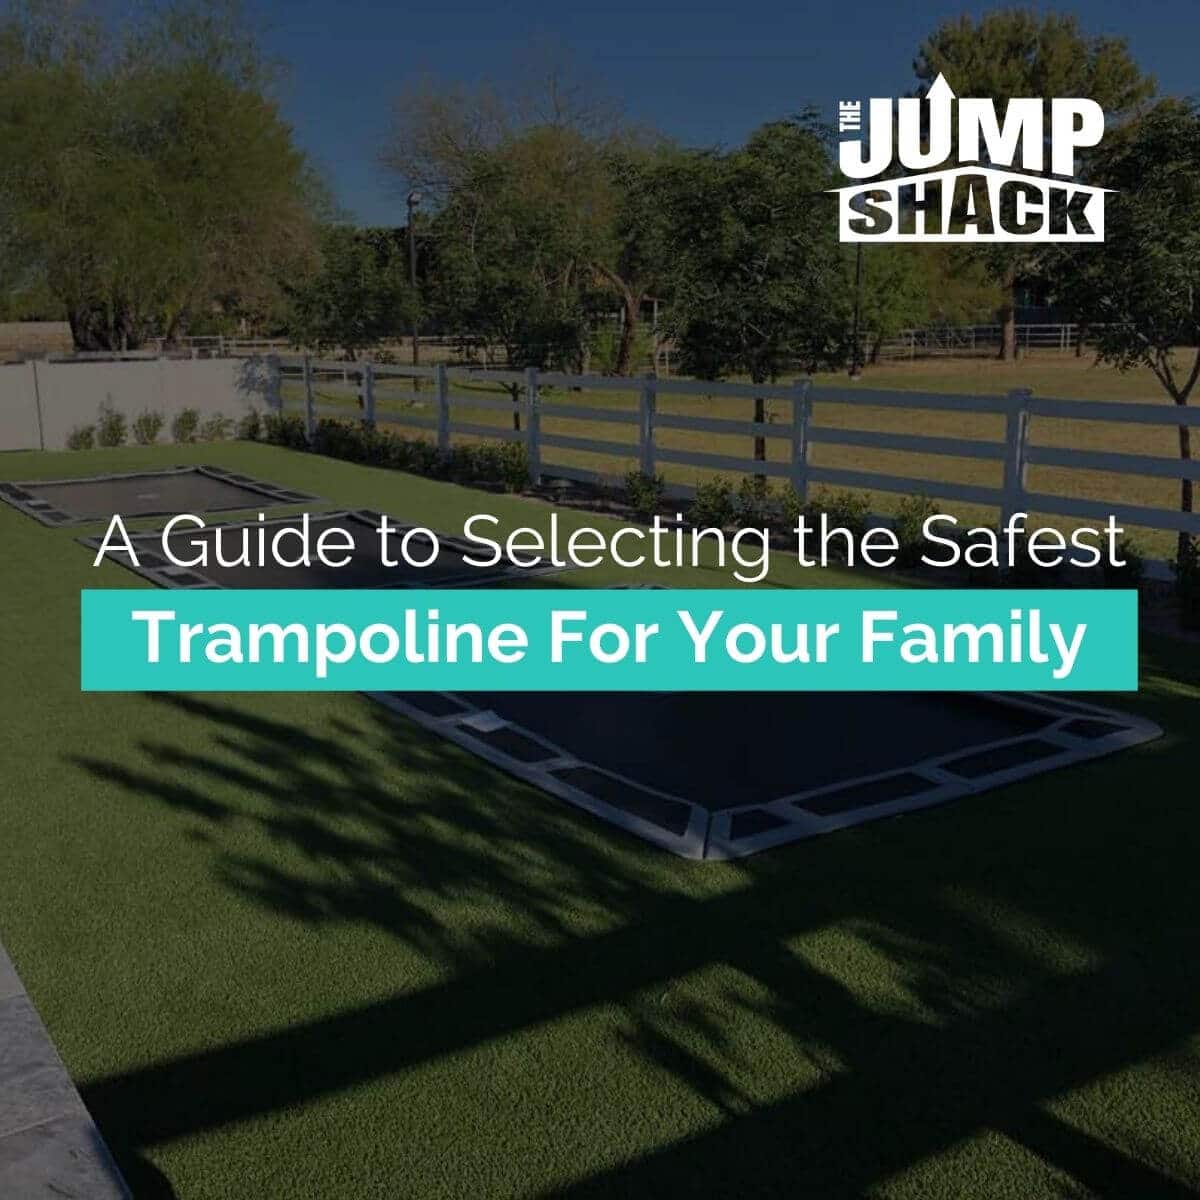 A Guide to Selecting the Safest Trampoline For Your Family